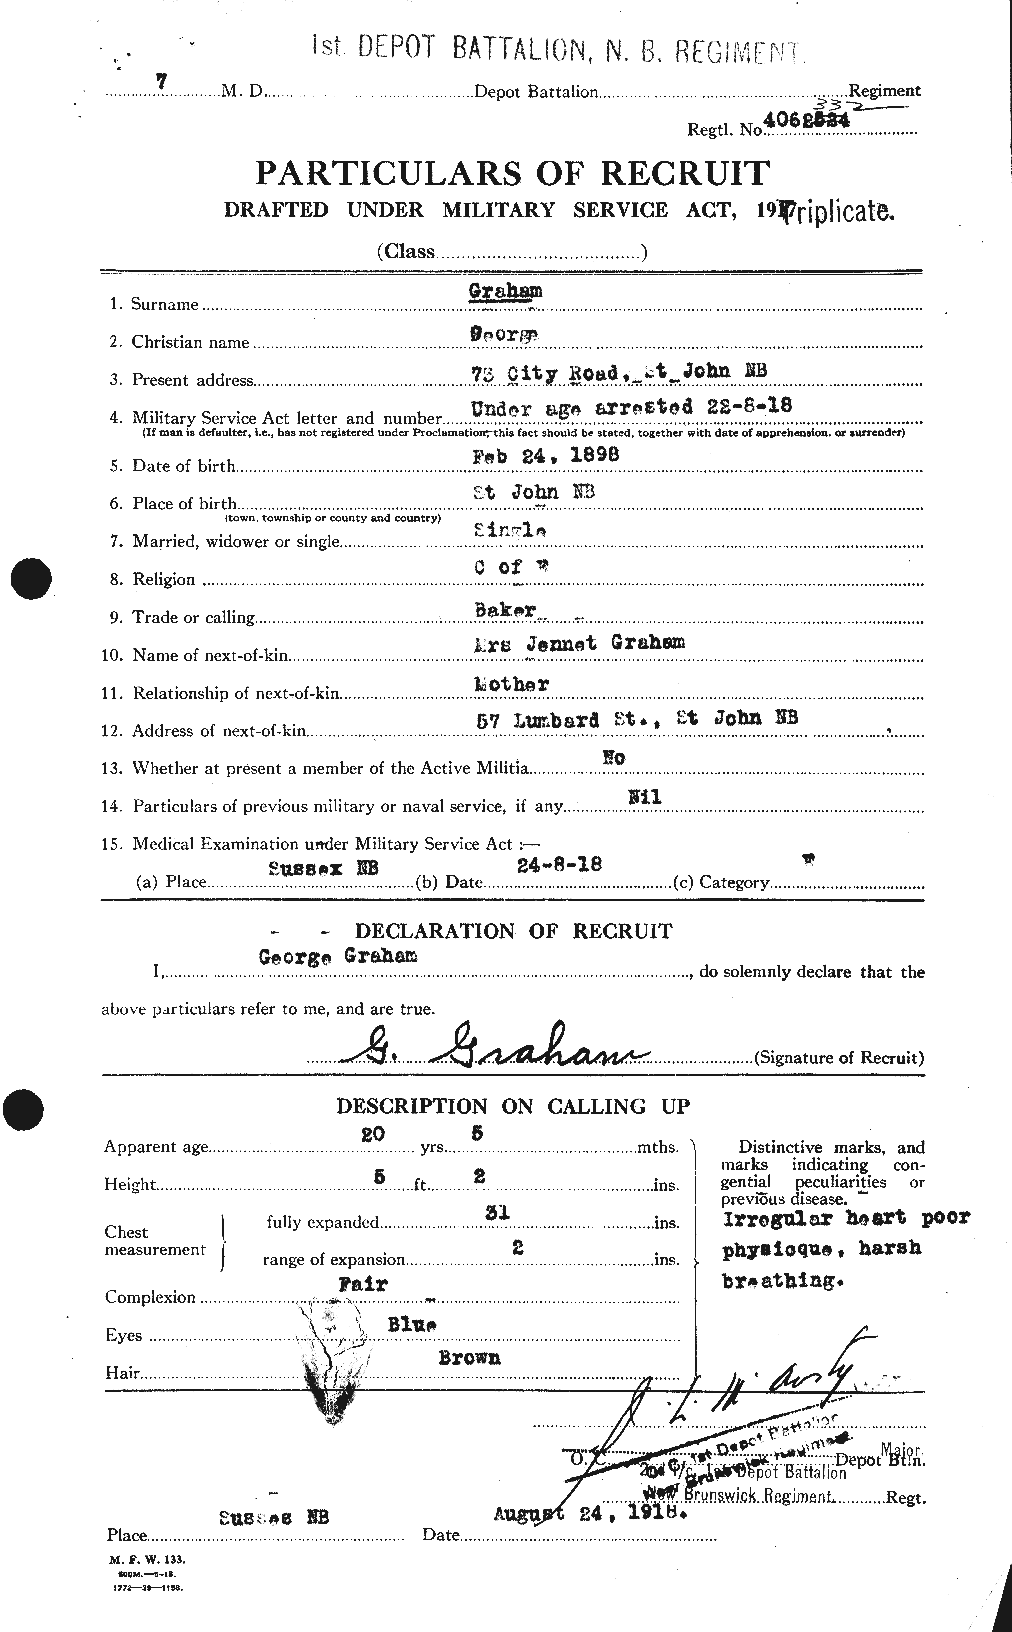 Personnel Records of the First World War - CEF 357626a